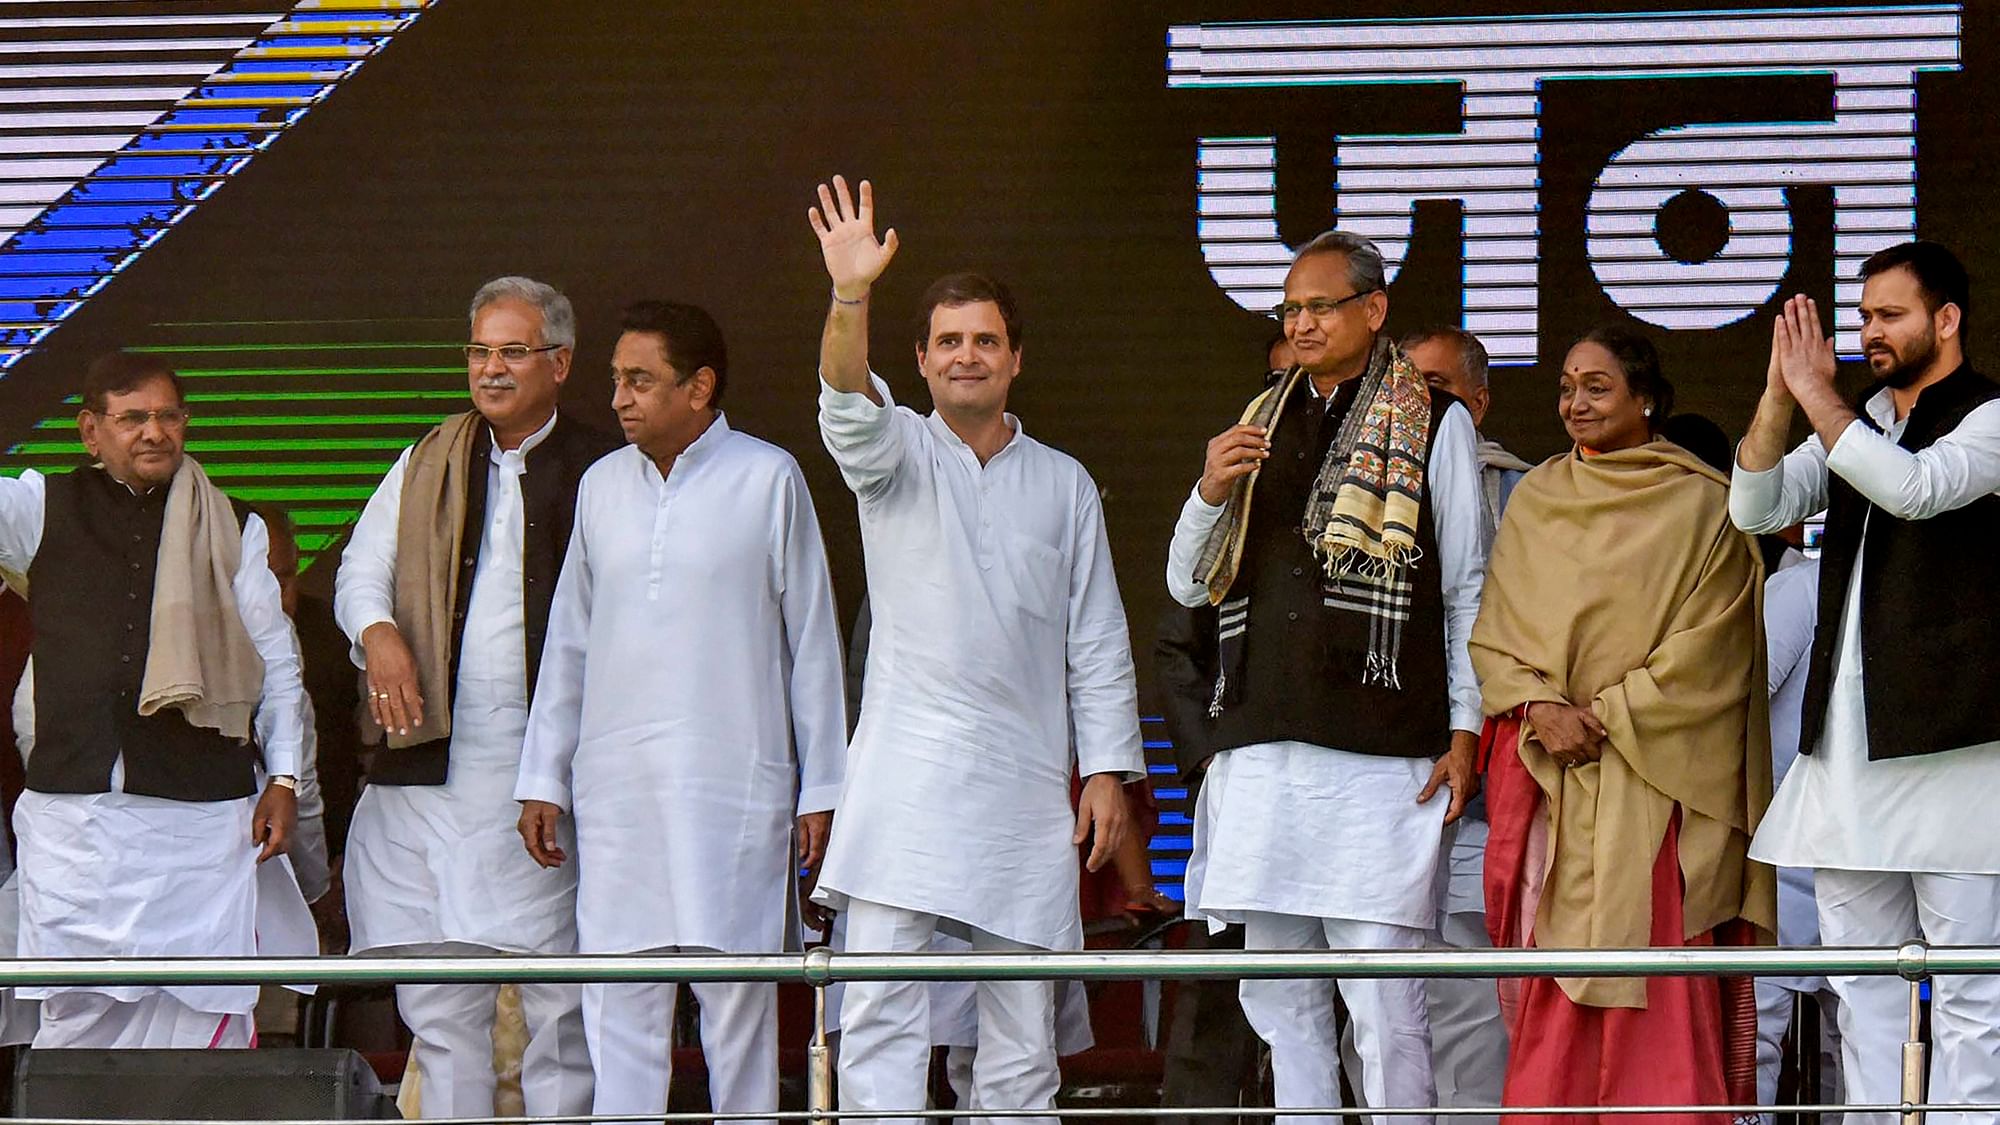 Rahul Gandhi at a rally in Patna where he said that farmers’ loans will be waived off if the Congress comes to power.